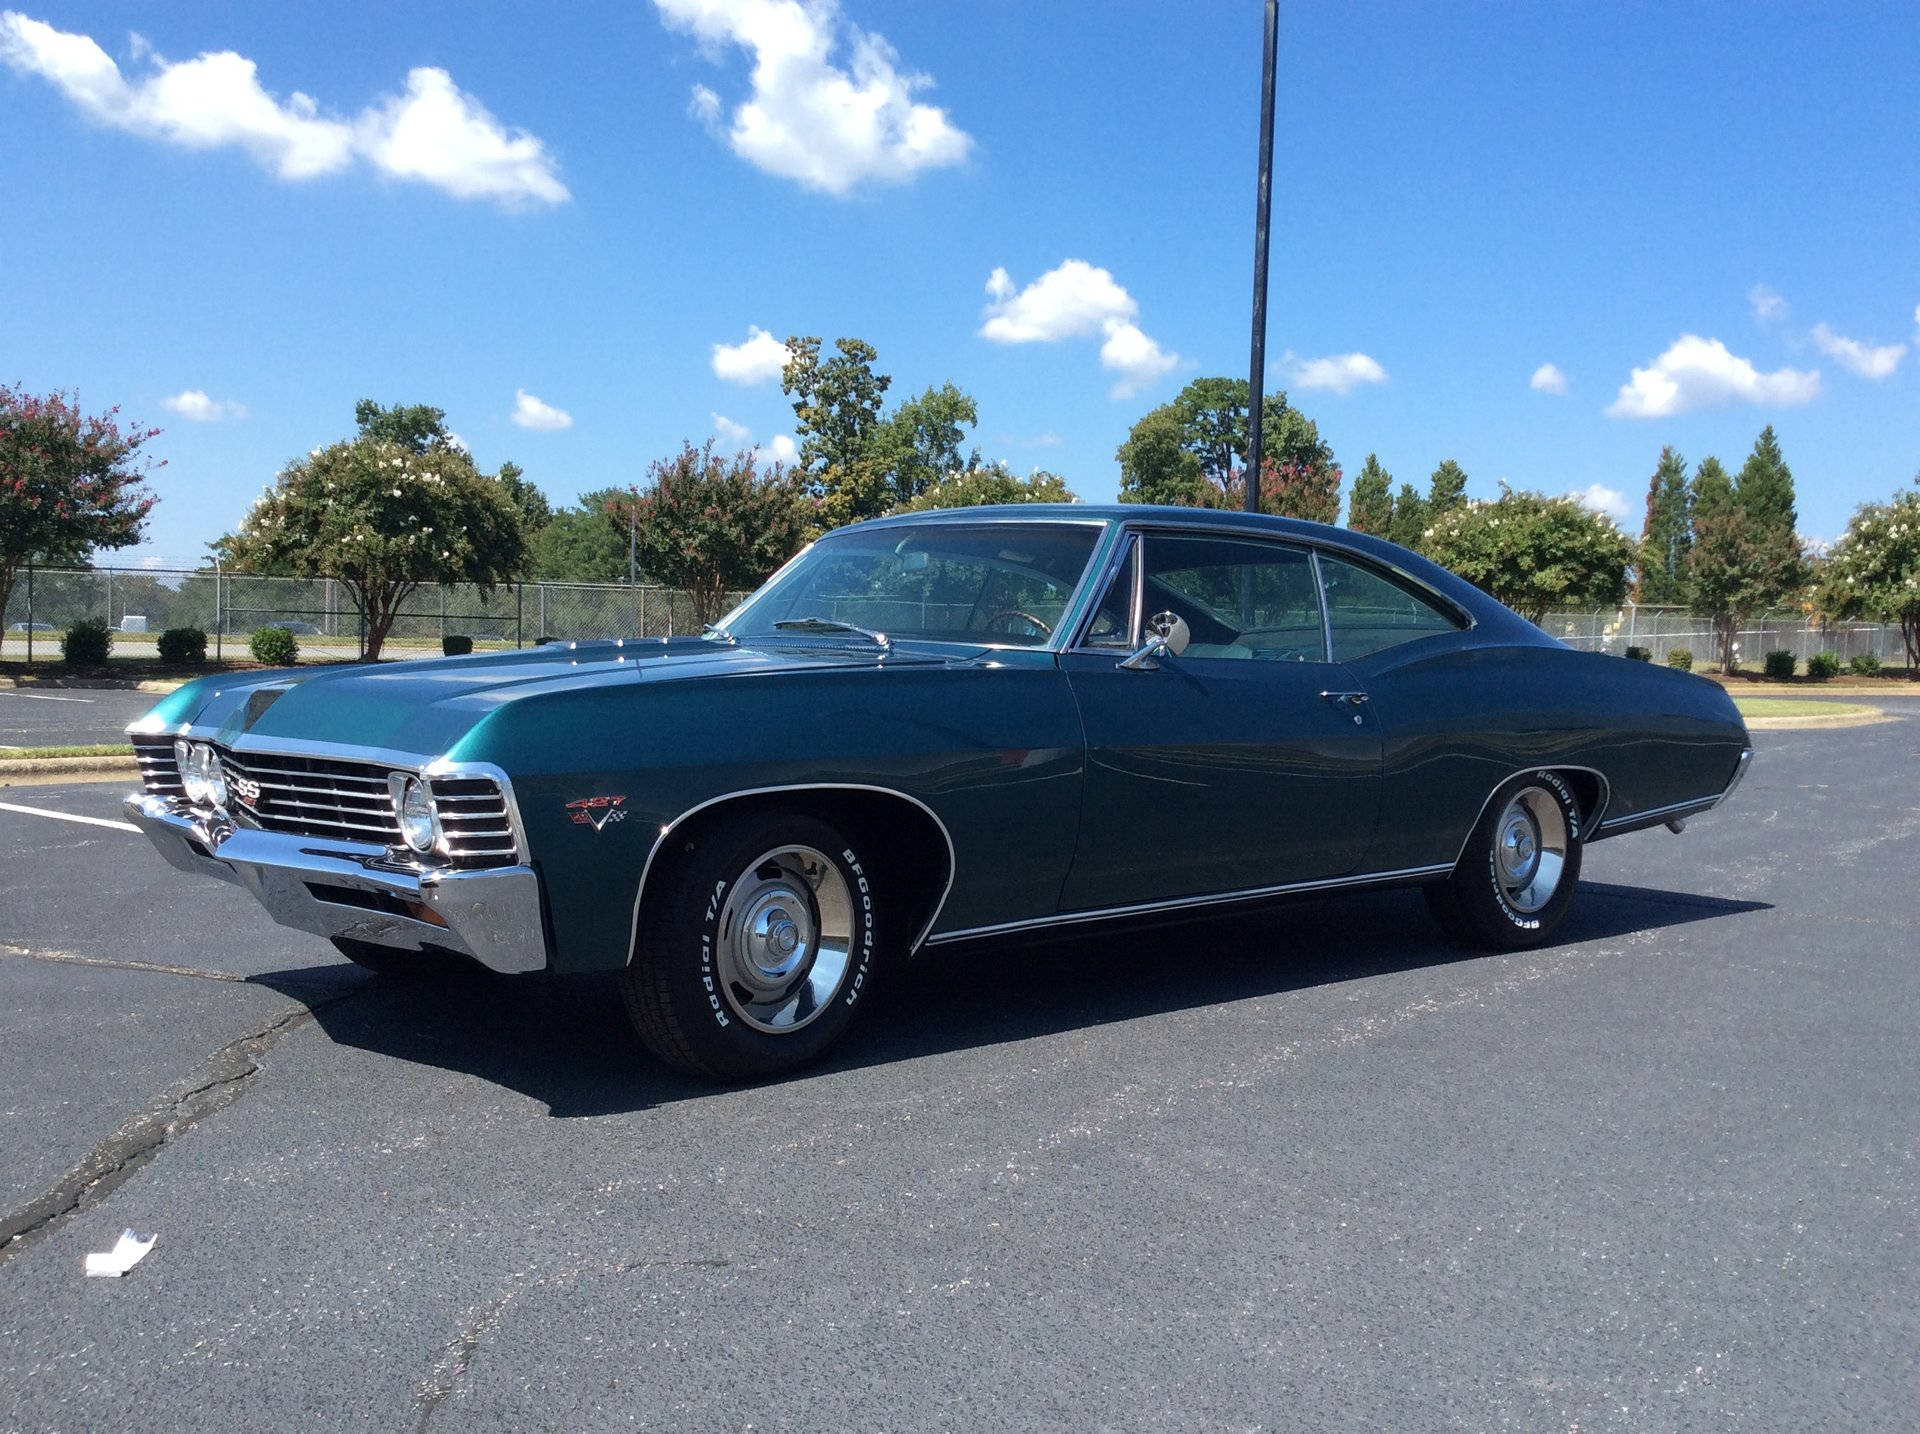 Majestic Turquoise Chevrolet Impala 1967 In All Its Glory